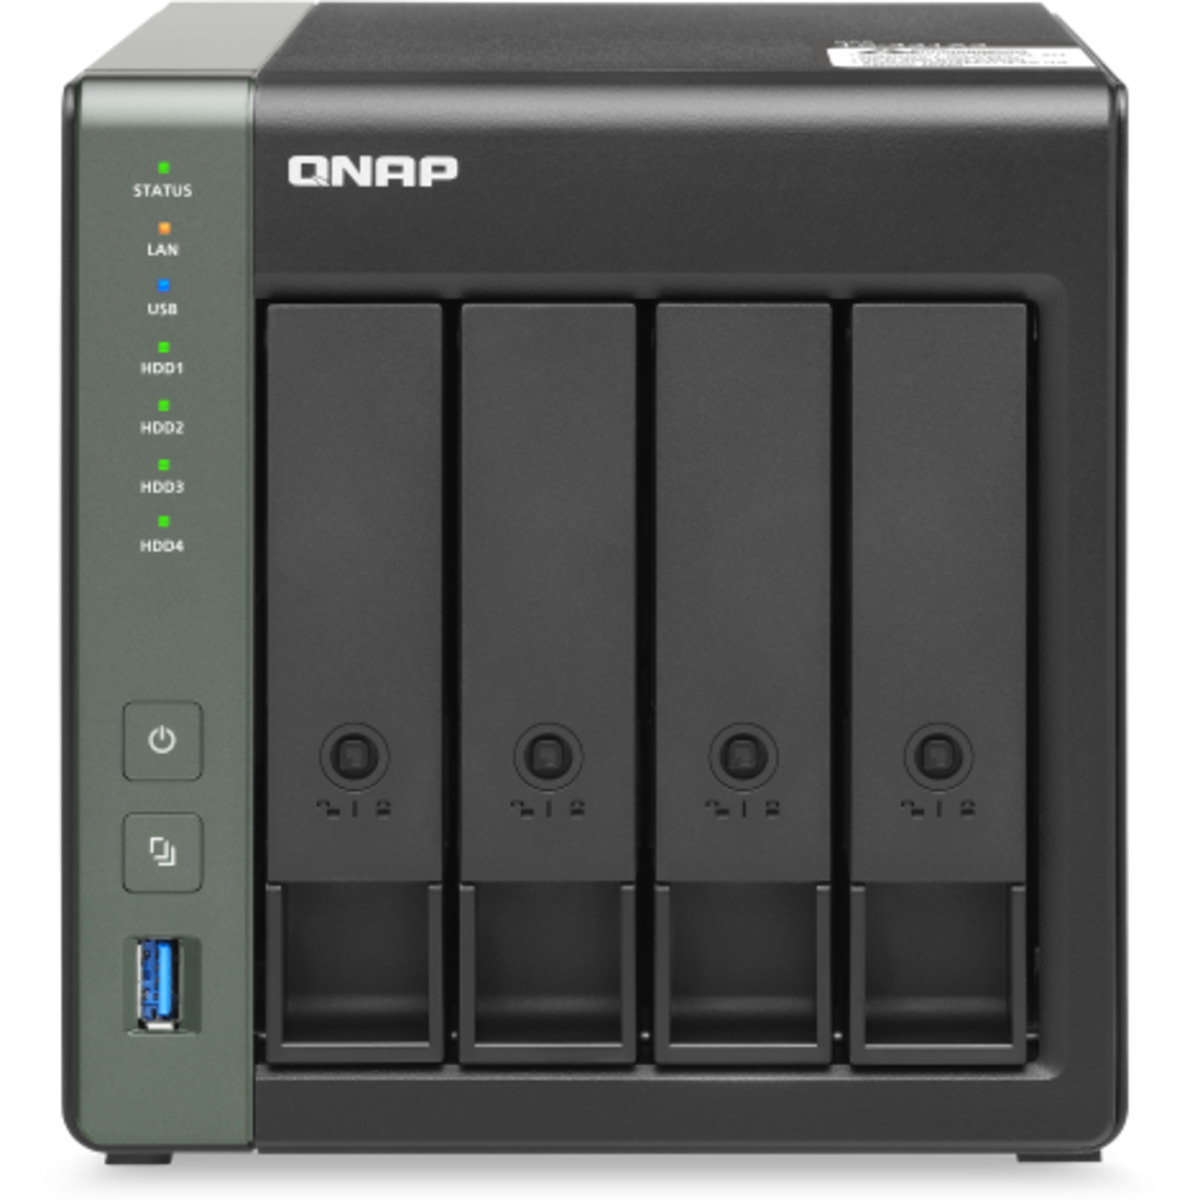 QNAP TS-431X3 8tb 4-Bay Desktop Multimedia / Power User / Business NAS - Network Attached Storage Device 4x2tb Western Digital Gold WD2005FBYZ 3.5 7200rpm SATA 6Gb/s HDD ENTERPRISE Class Drives Installed - Burn-In Tested - FREE RAM UPGRADE TS-431X3